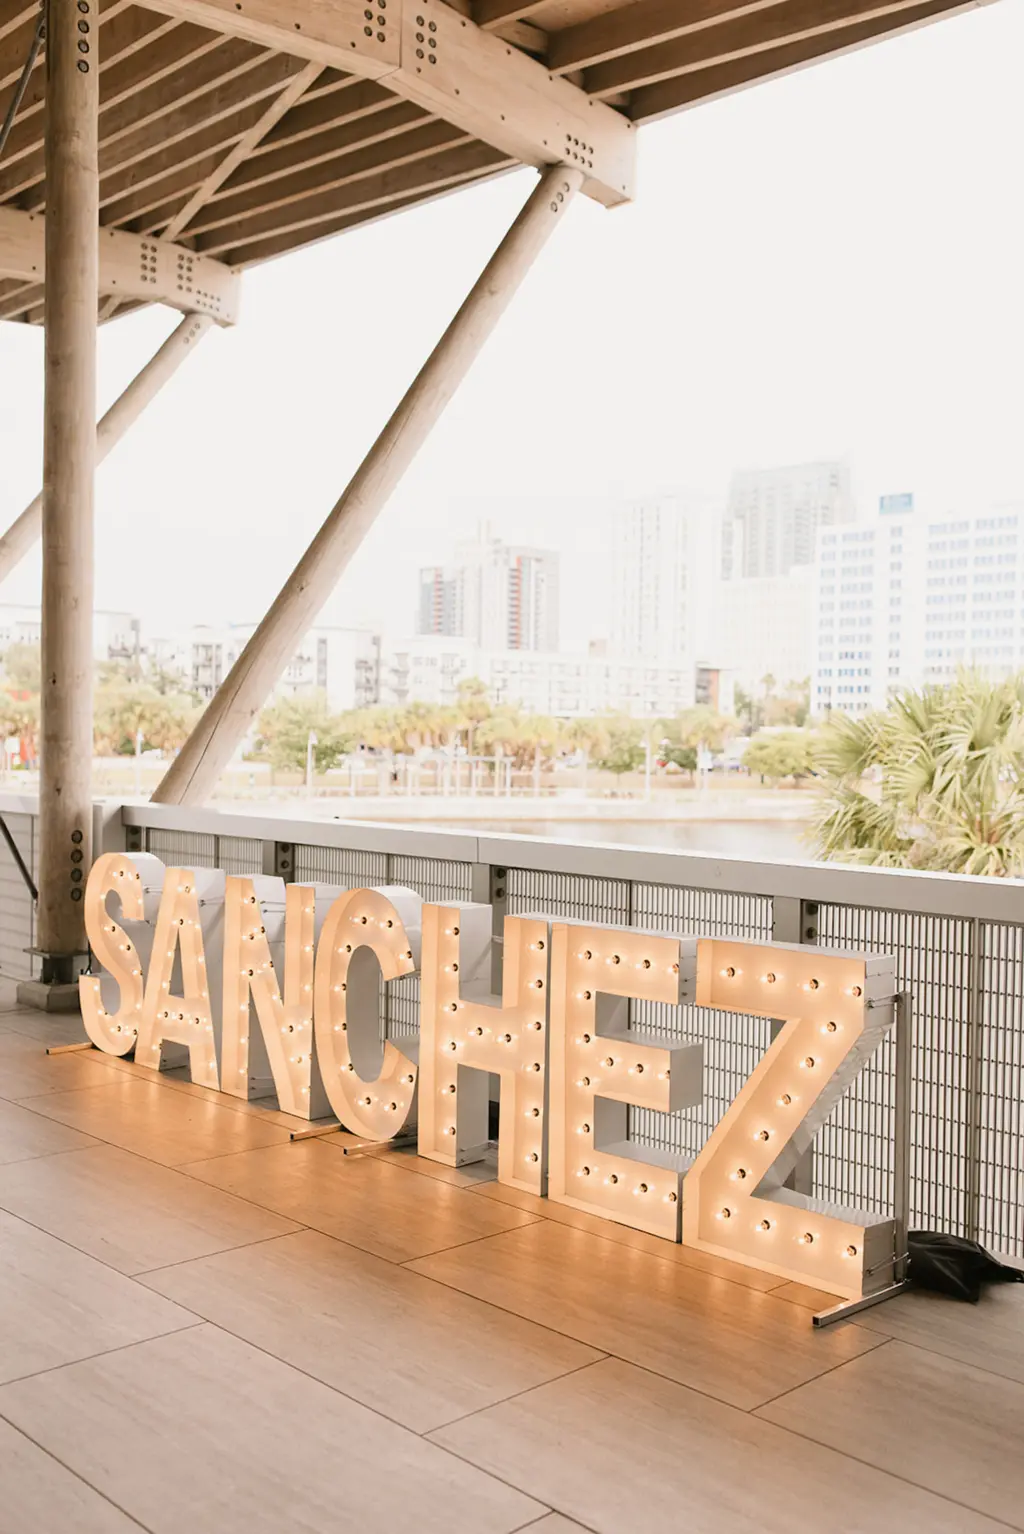 Large Marquee Letters Wedding Reception Decor Ideas